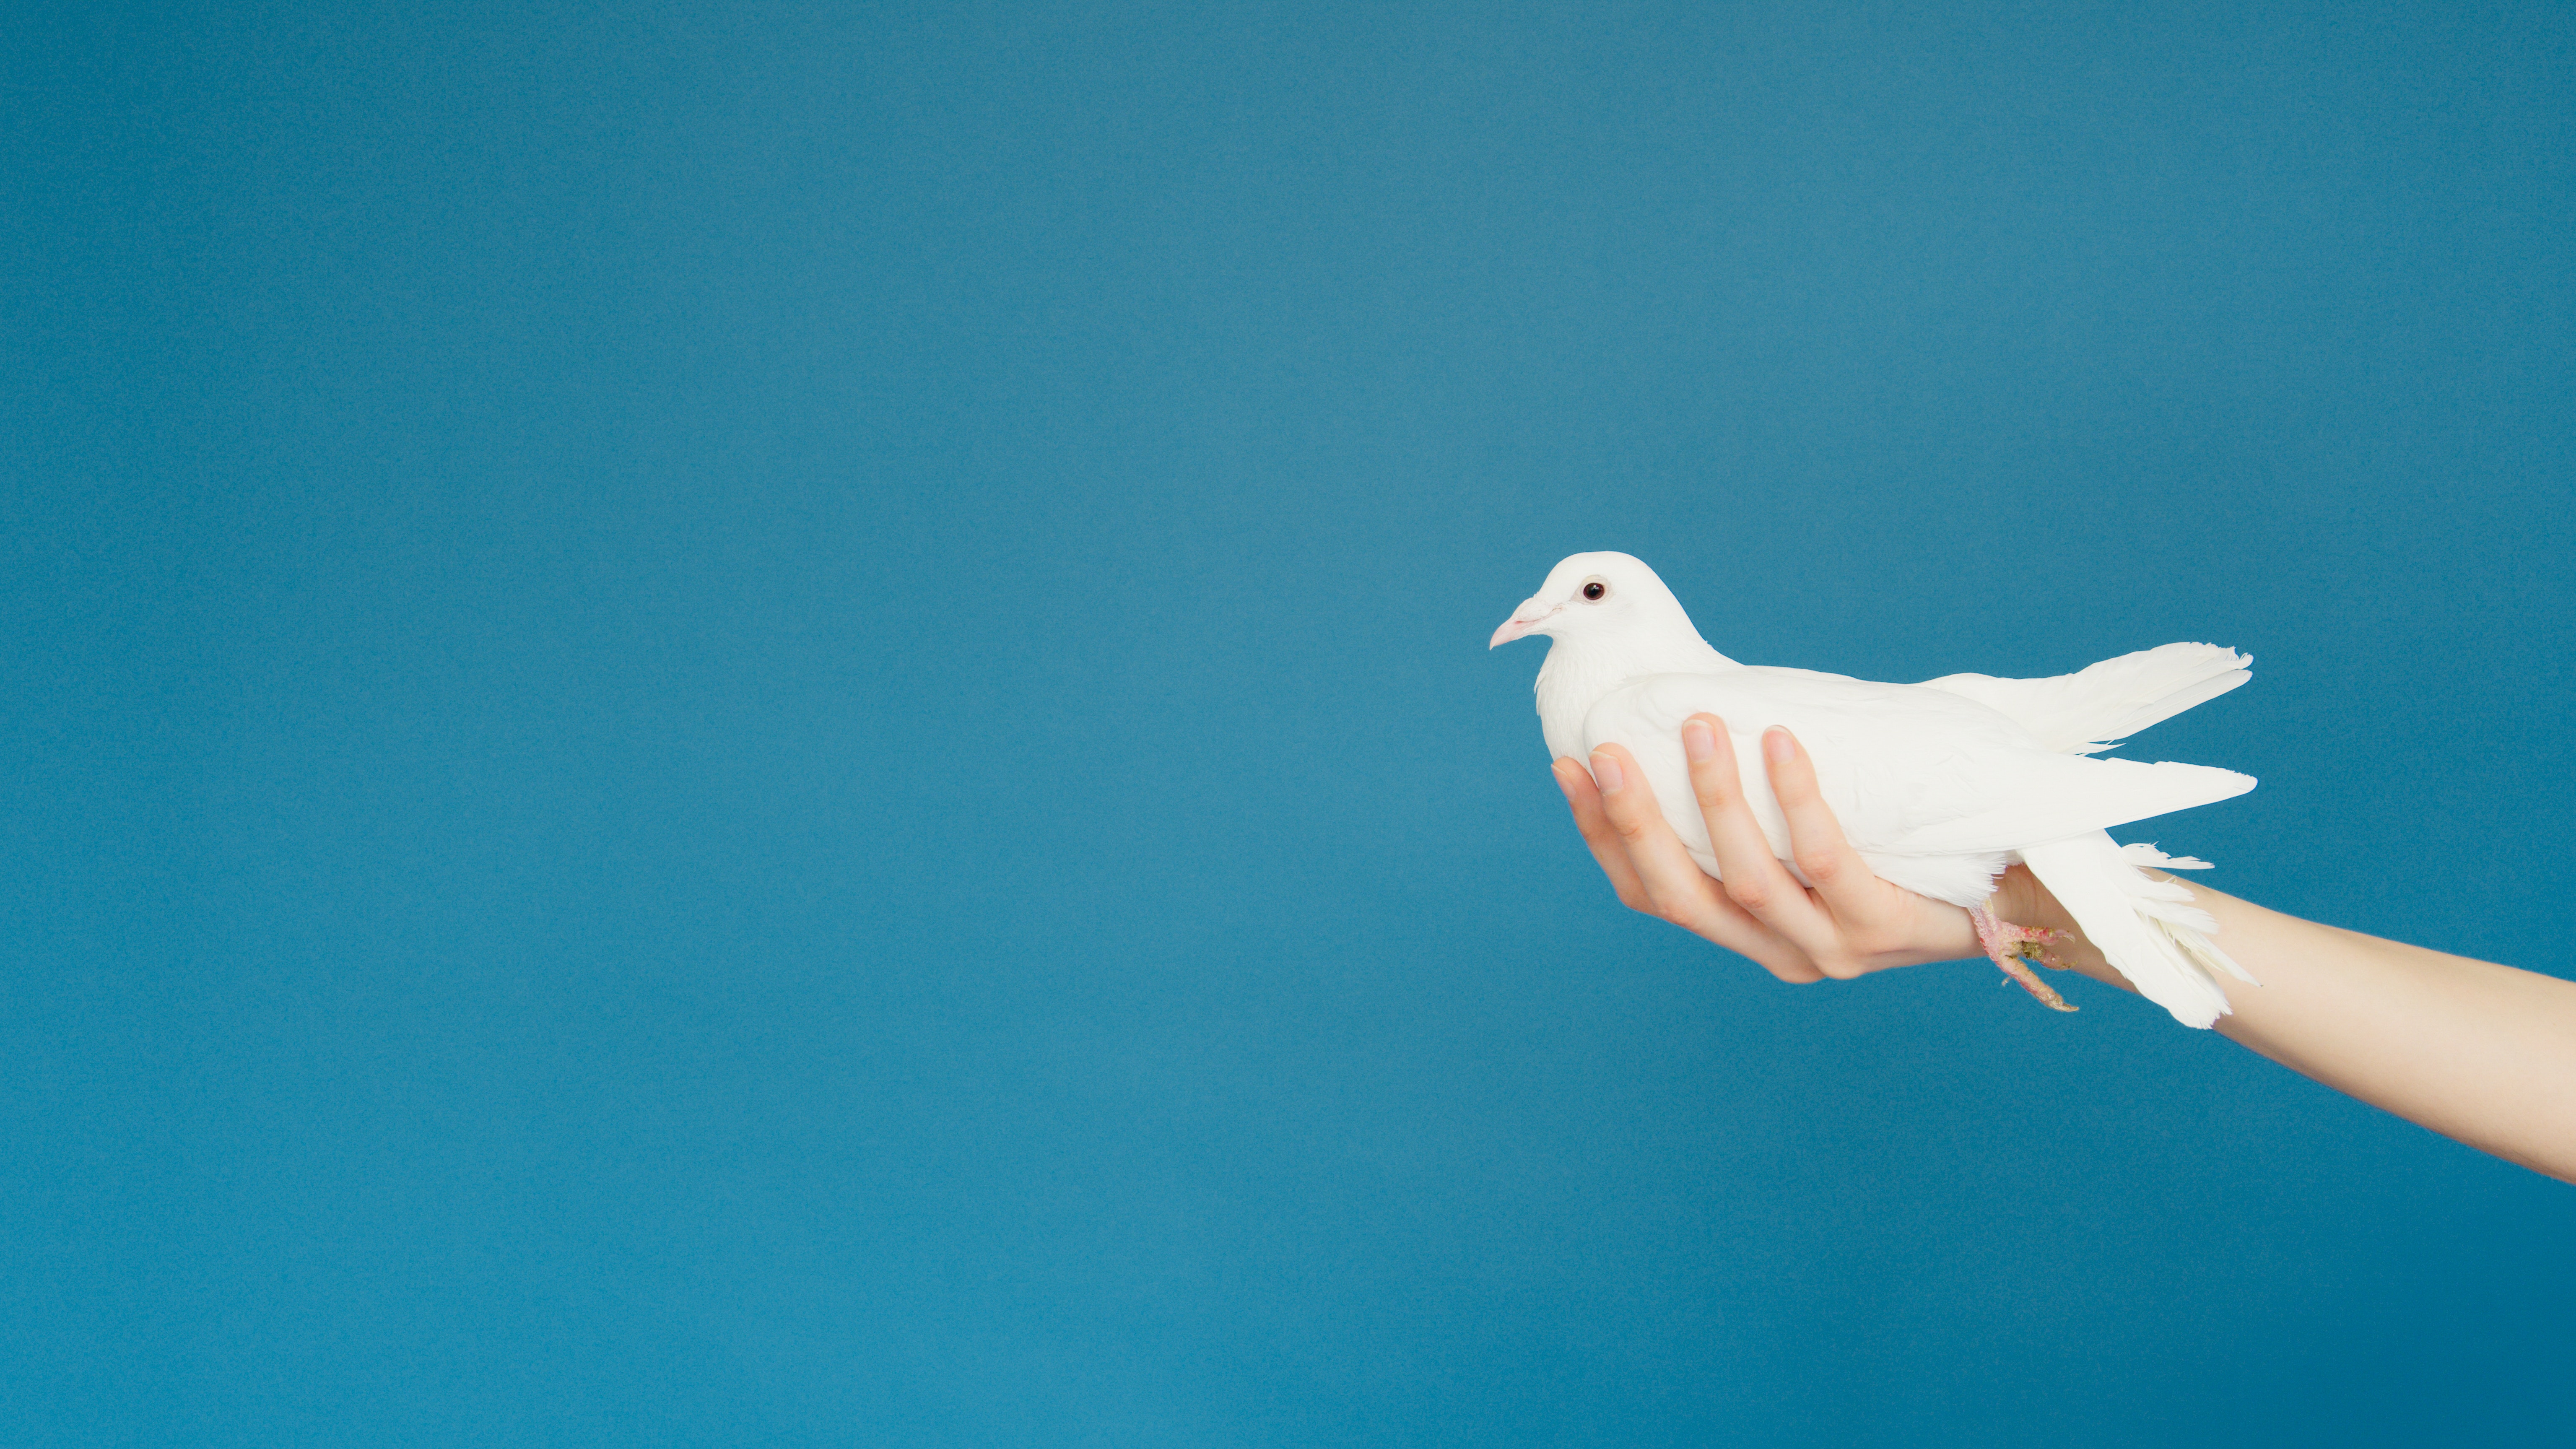 A hand cups a white dove and extends forward as if offering the dove.